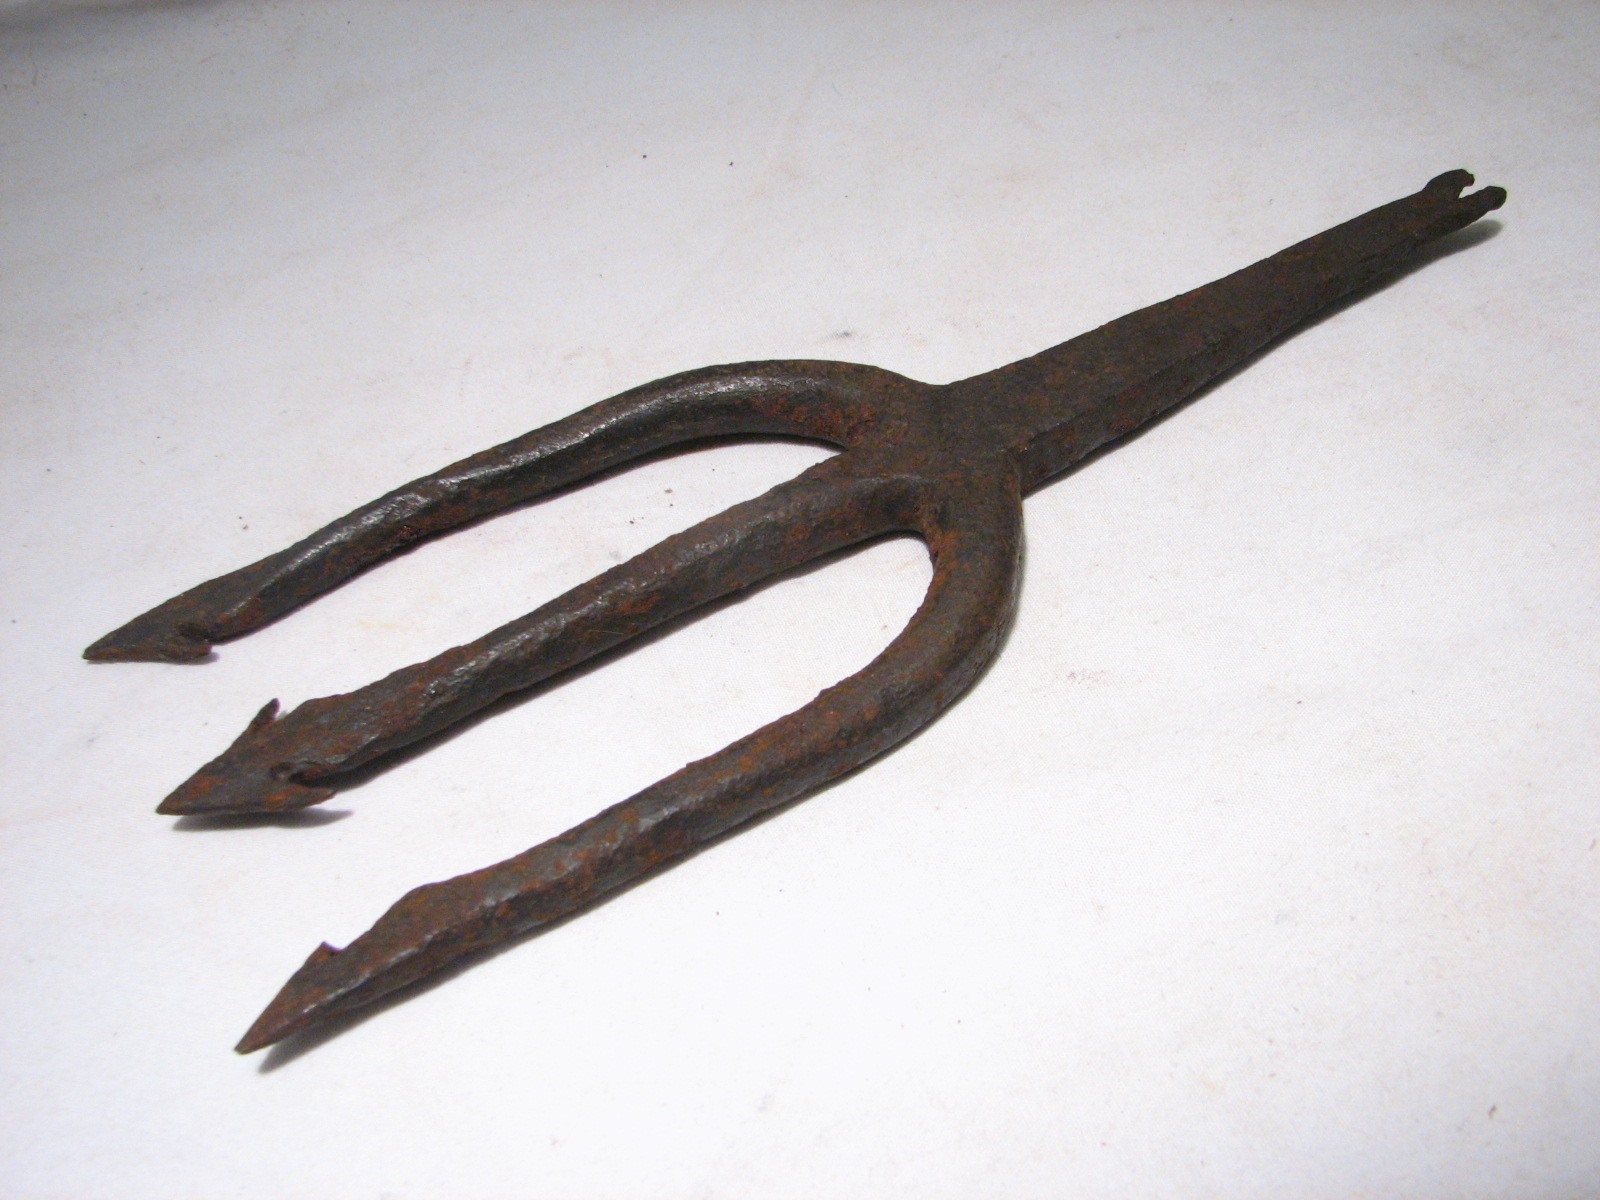 Neat Antique 3 Tine Fish Eel Frog Gig Tool Spear Head Fishing Hand ...